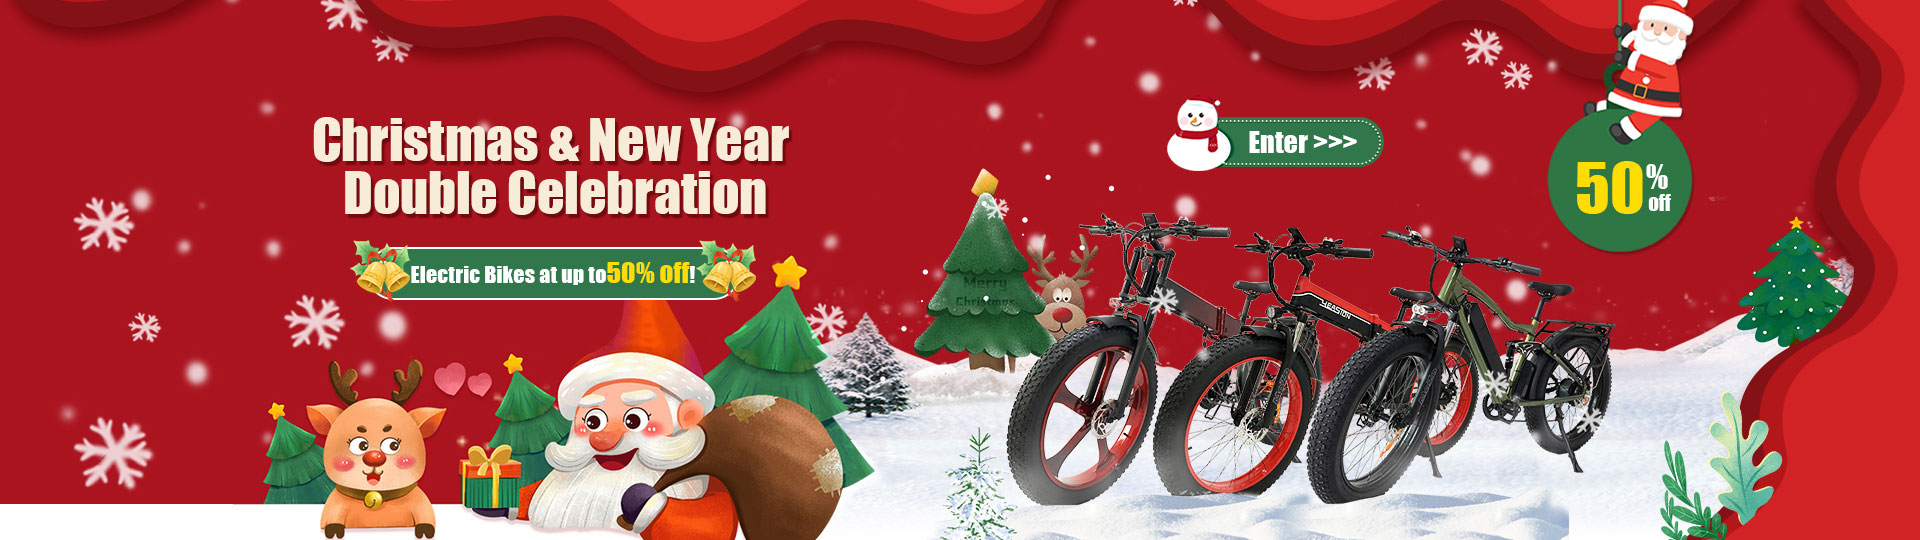 Double Celebration at Cyclemix: Christmas & New Year Special!